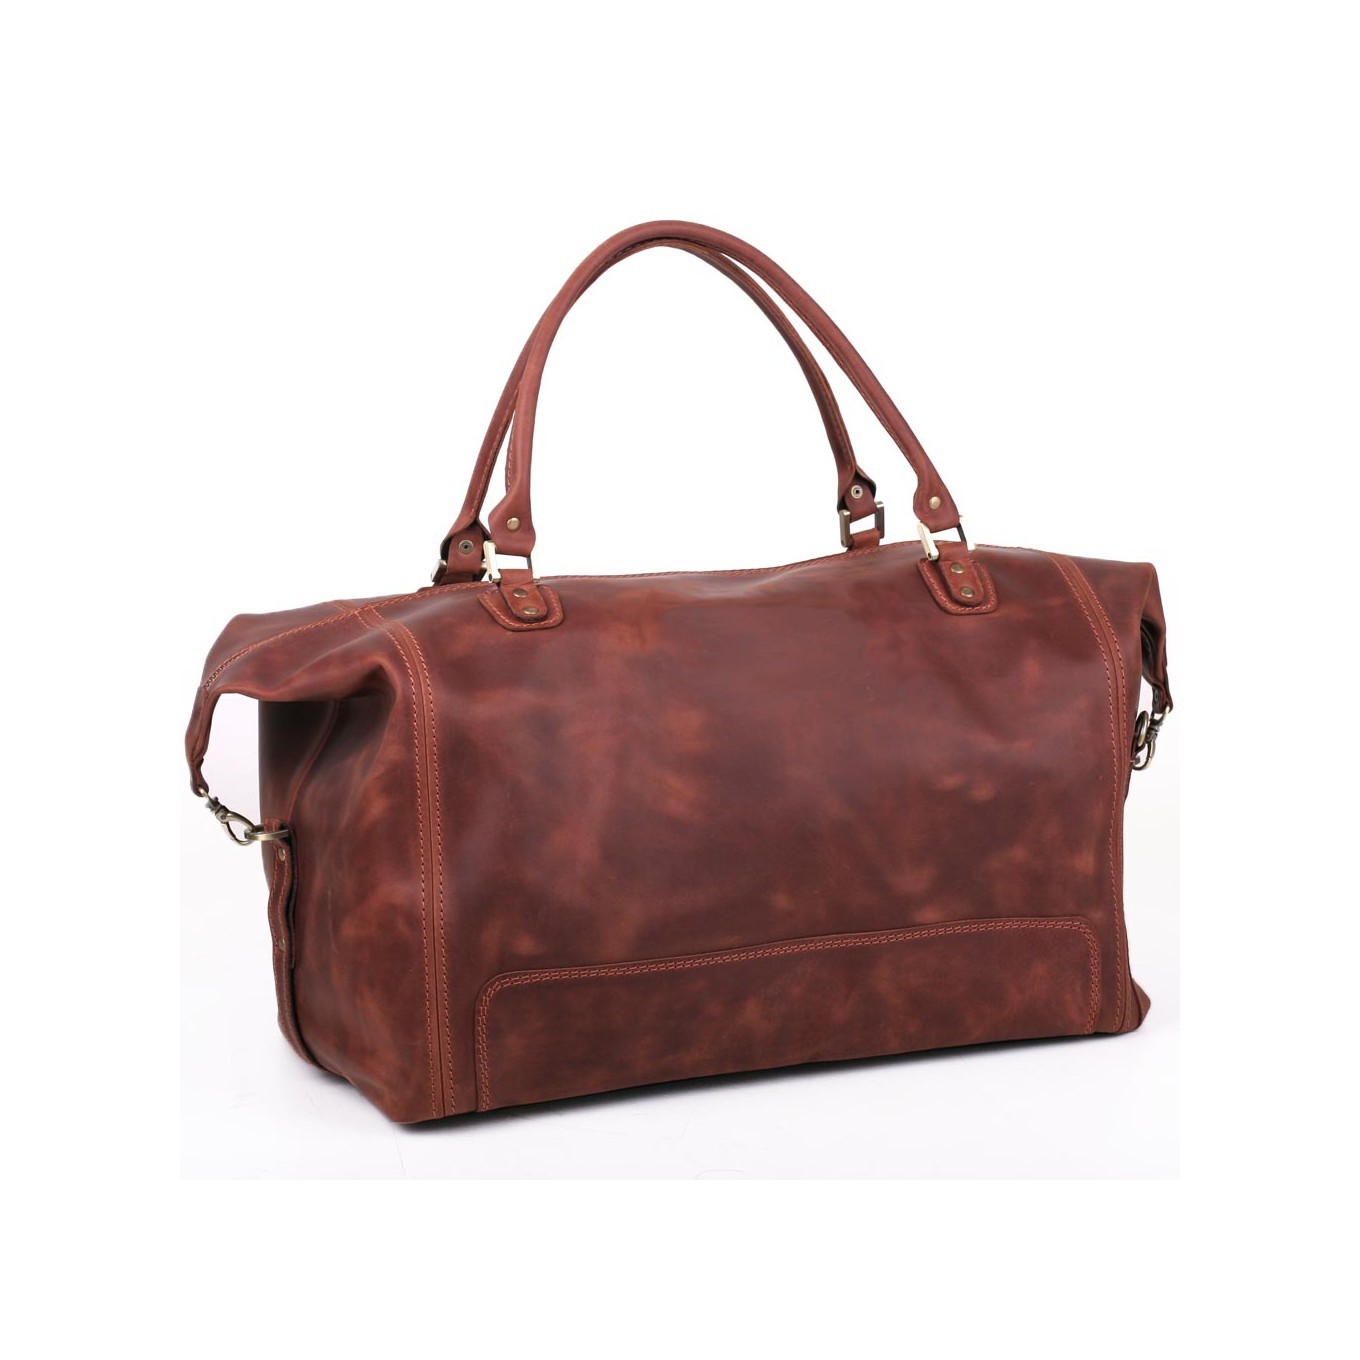 Solid roomy cognac-colored leather carpetbag